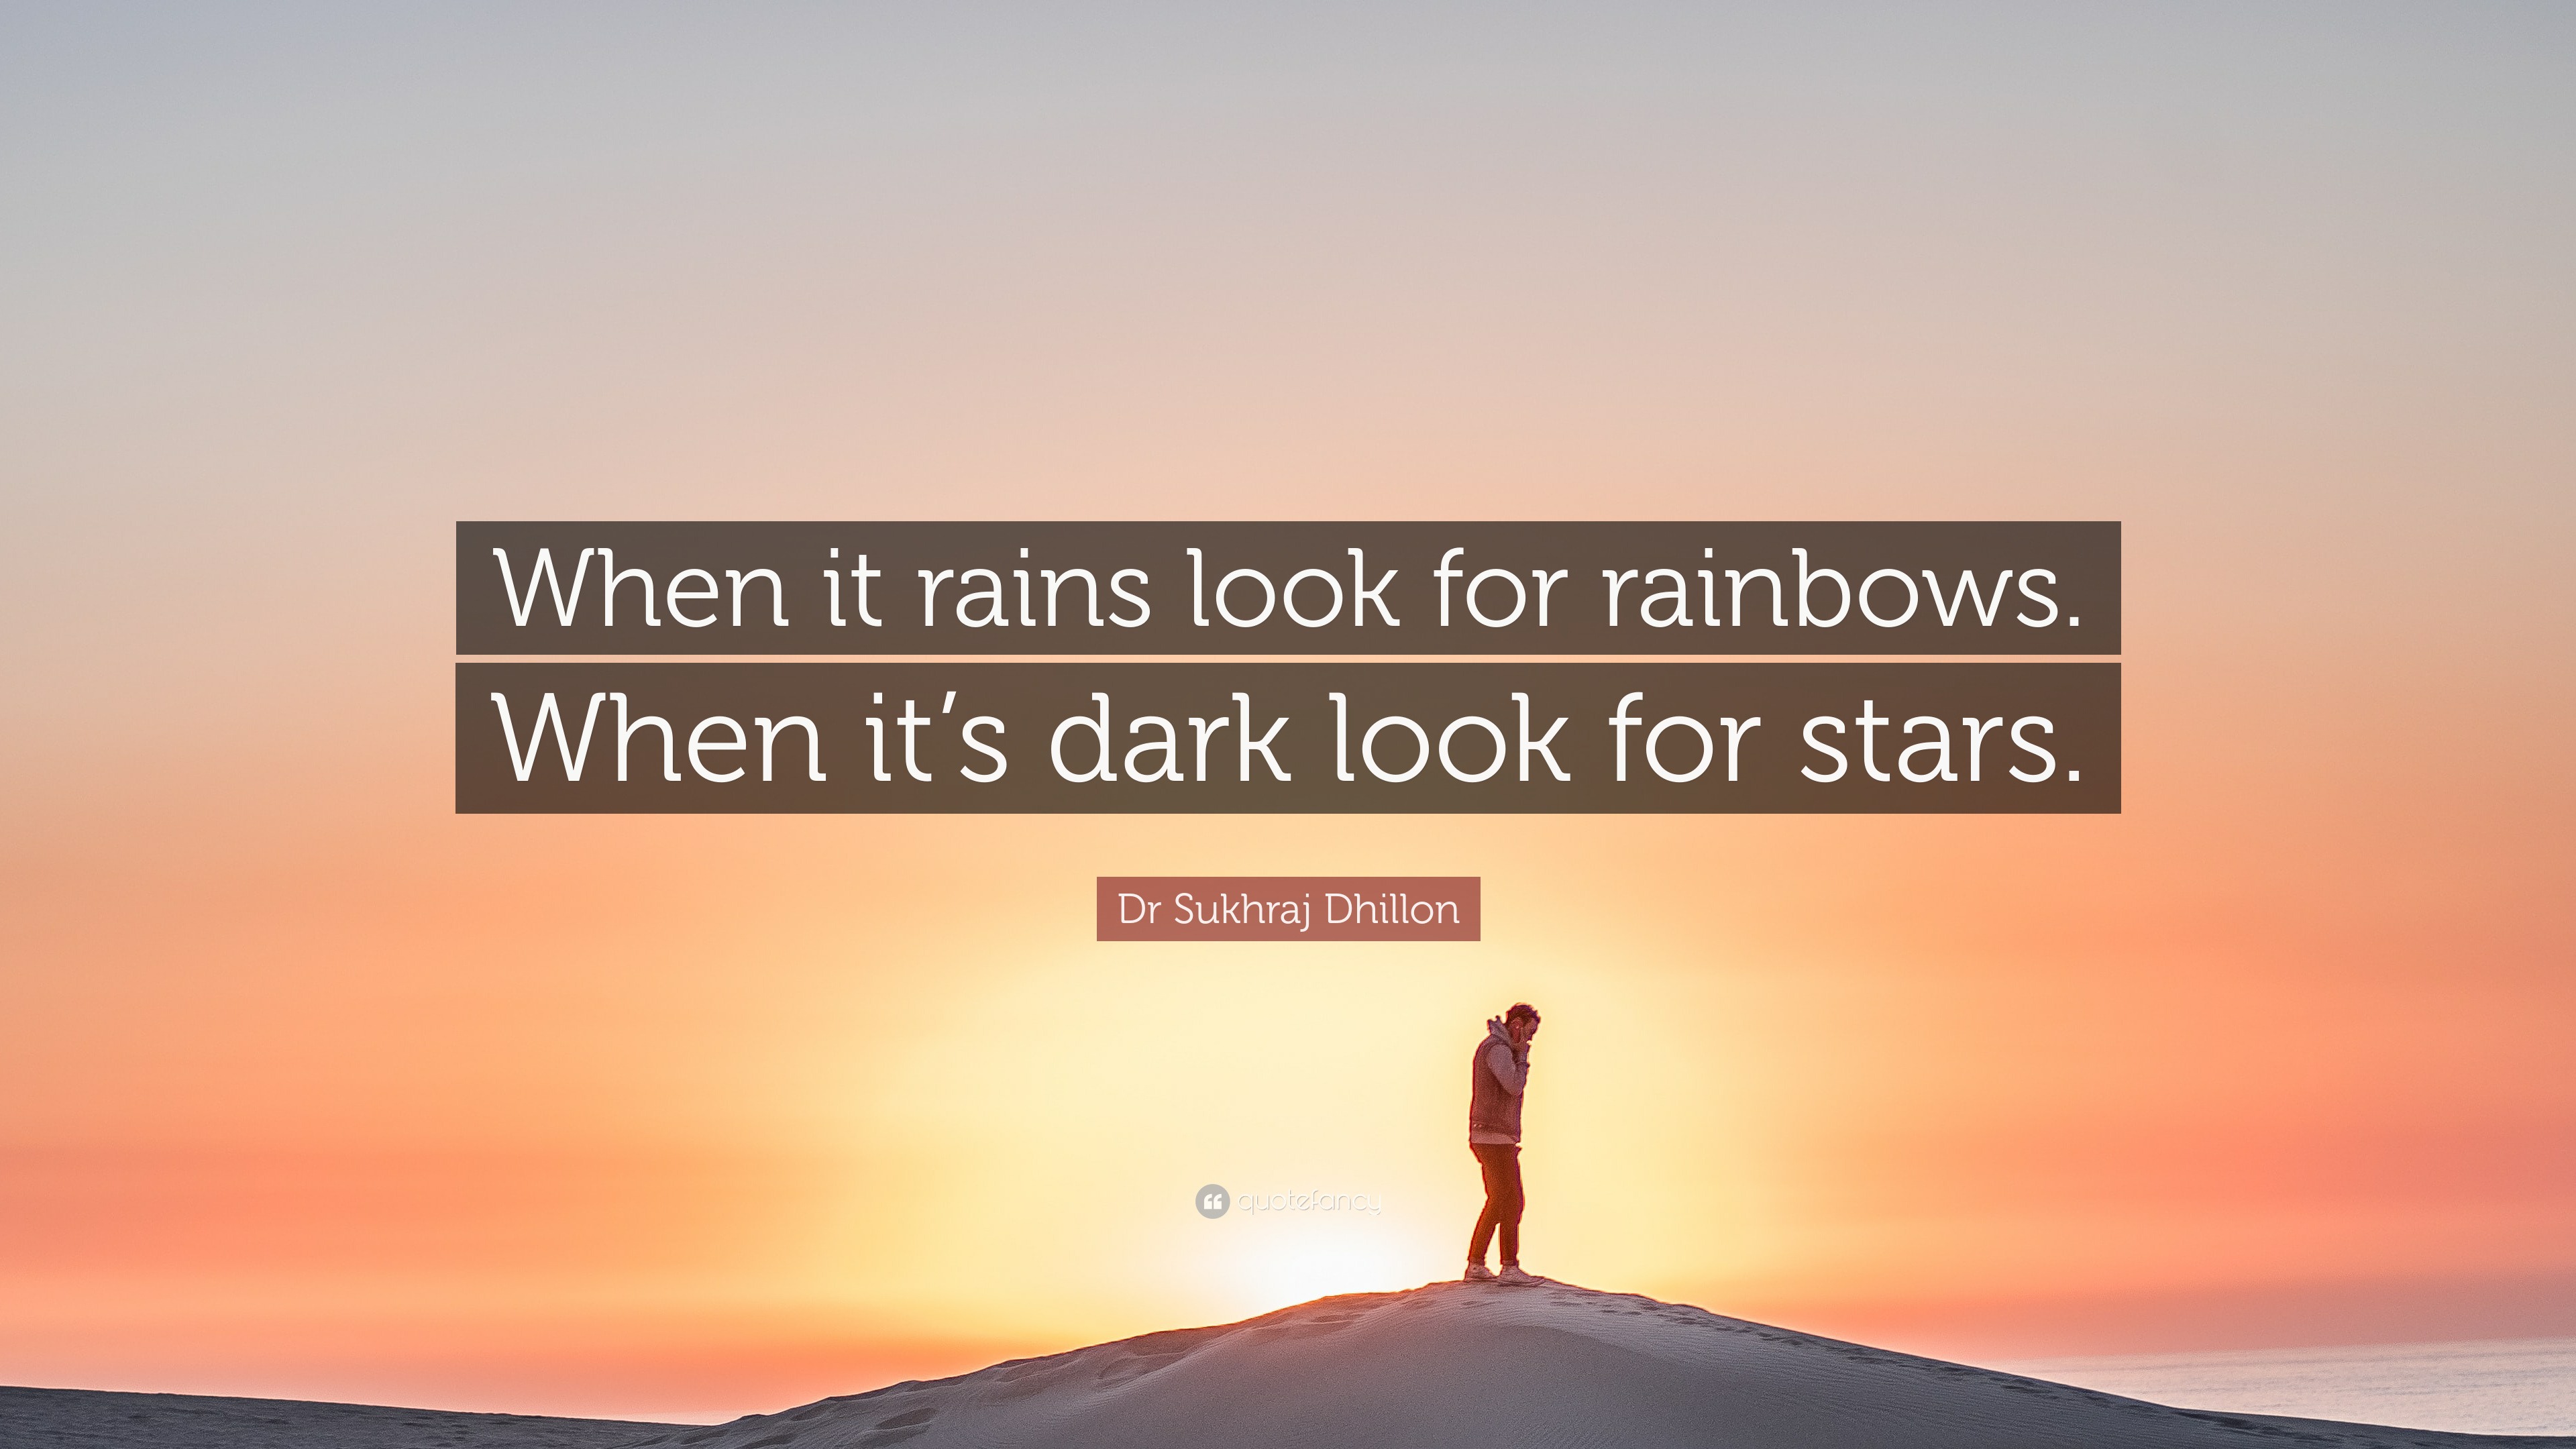 Dr Sukhraj Dhillon Quote When It Rains Look For Rainbows When It S Dark Look For Stars